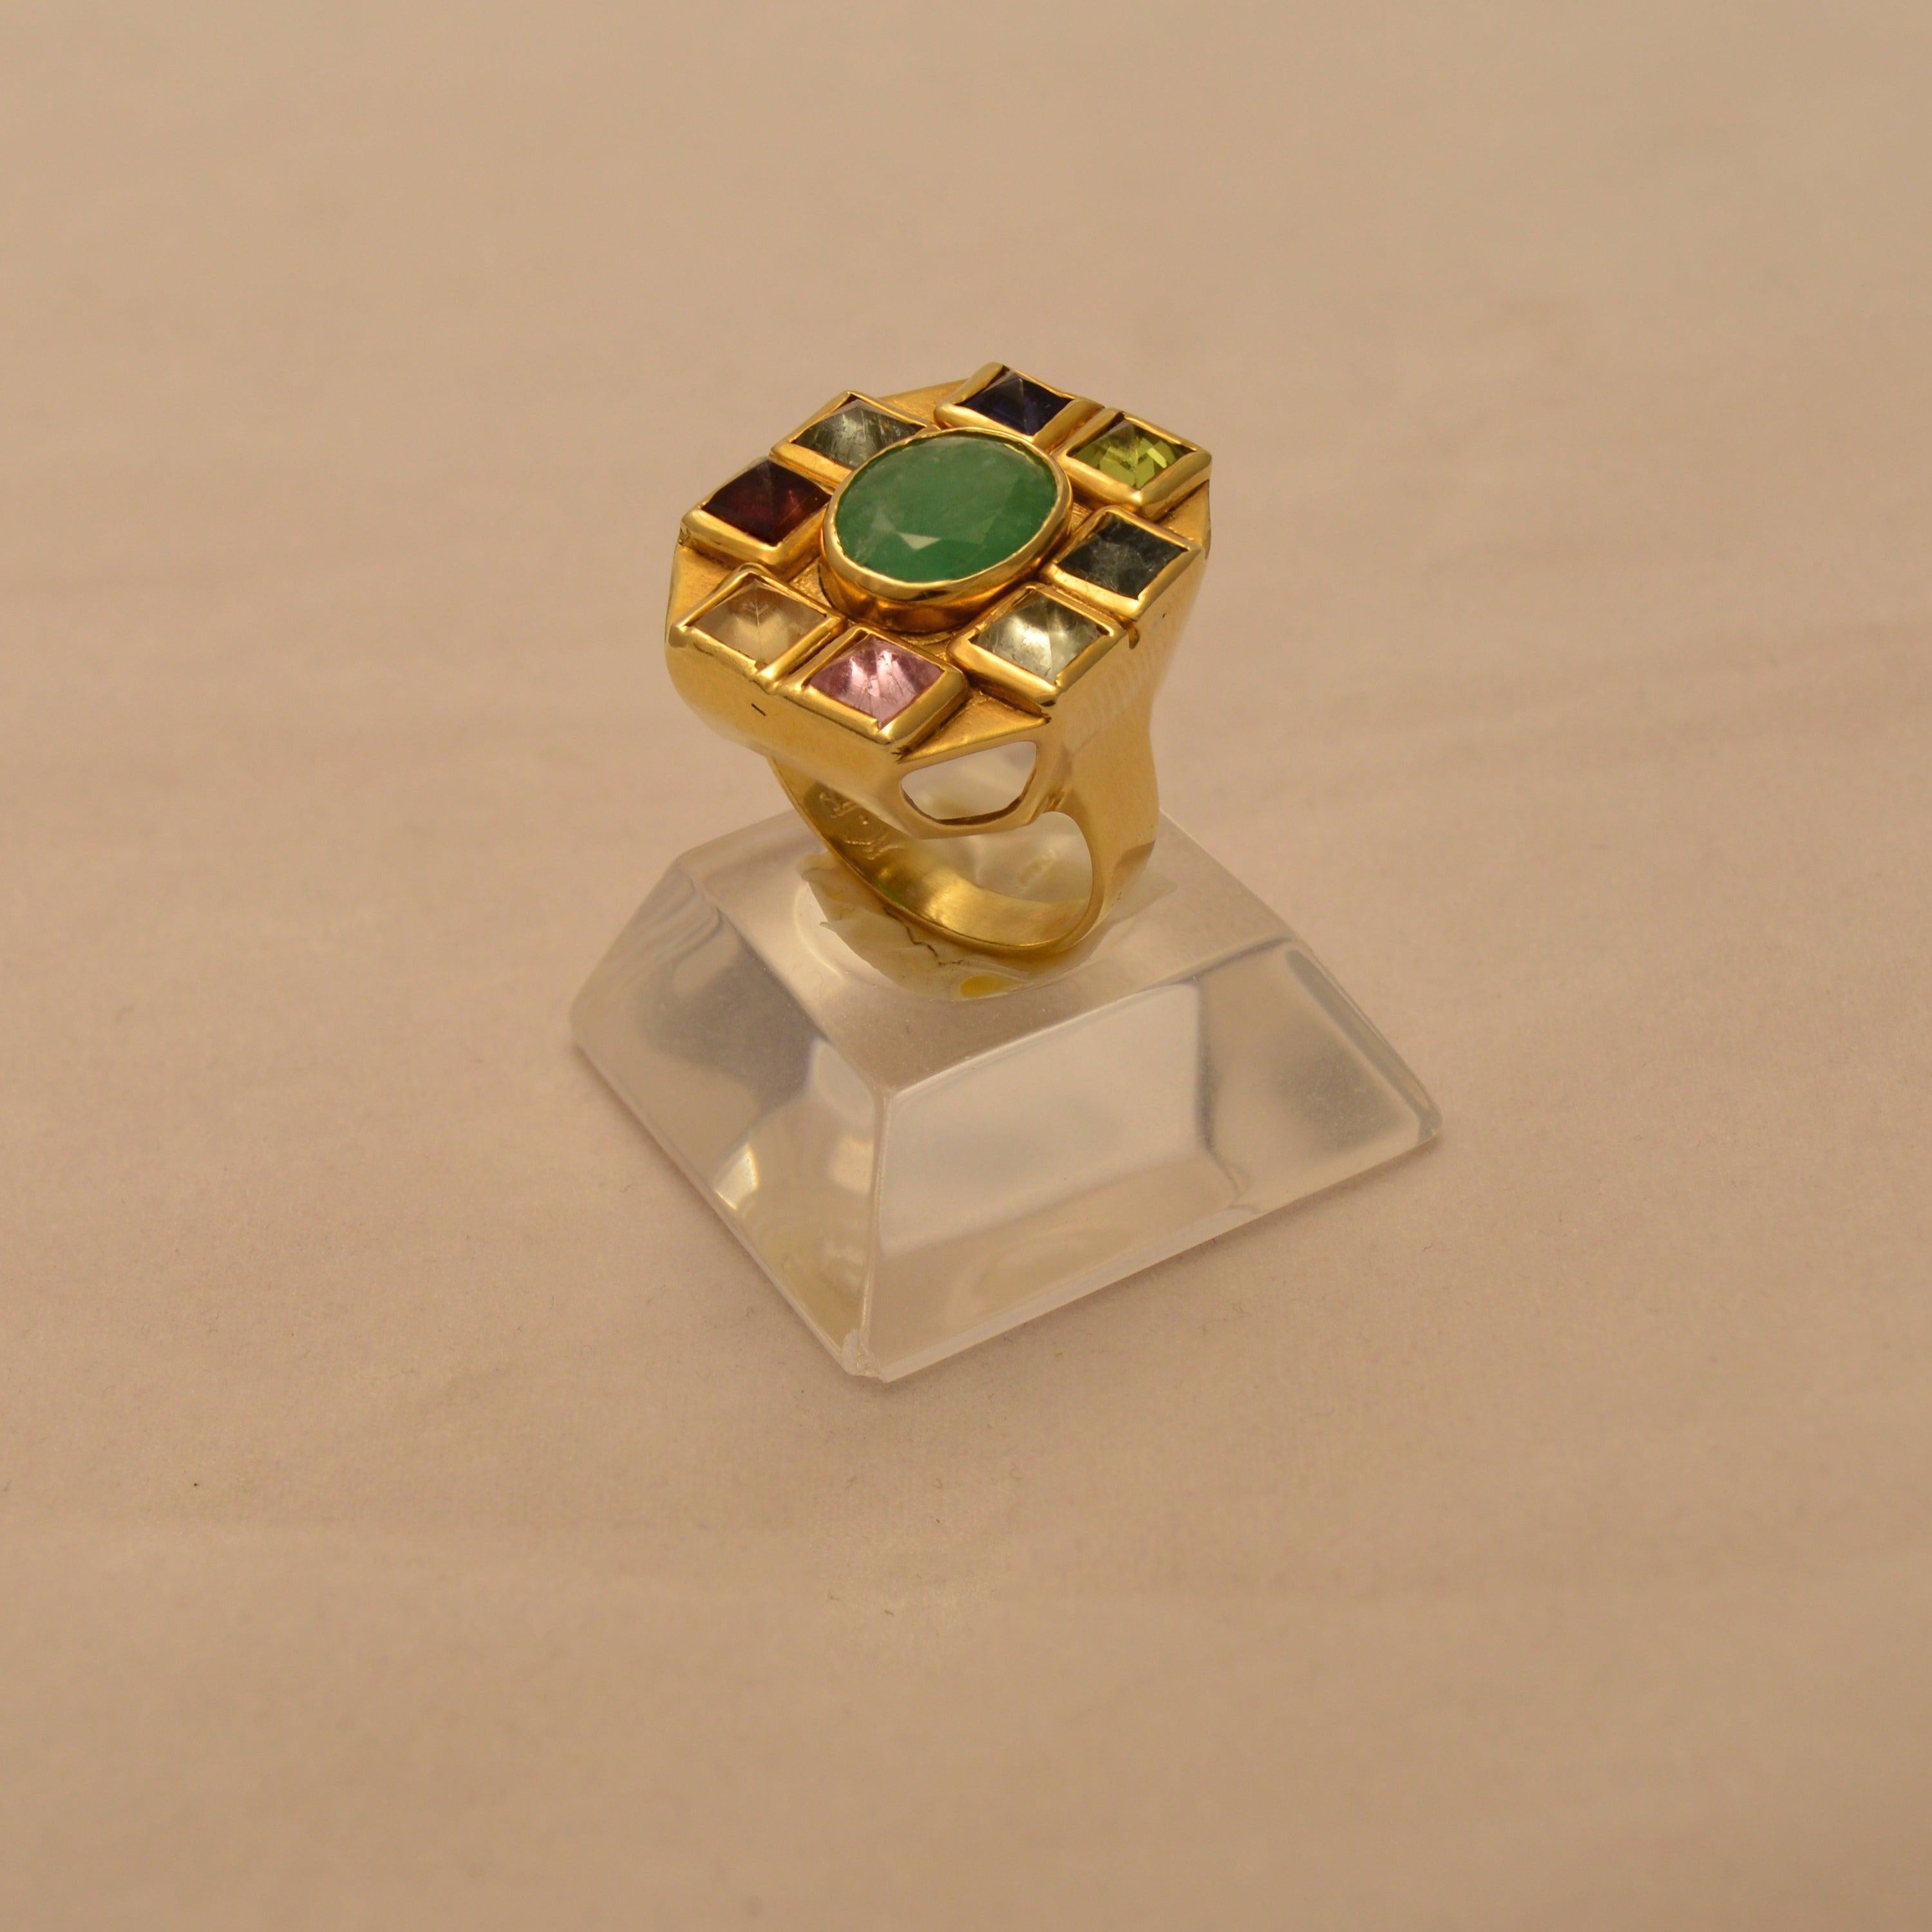 Ring in 18k Gold with a Zambian emerald and piramide cut tourmalines (B-06) - Dinos-Virginia